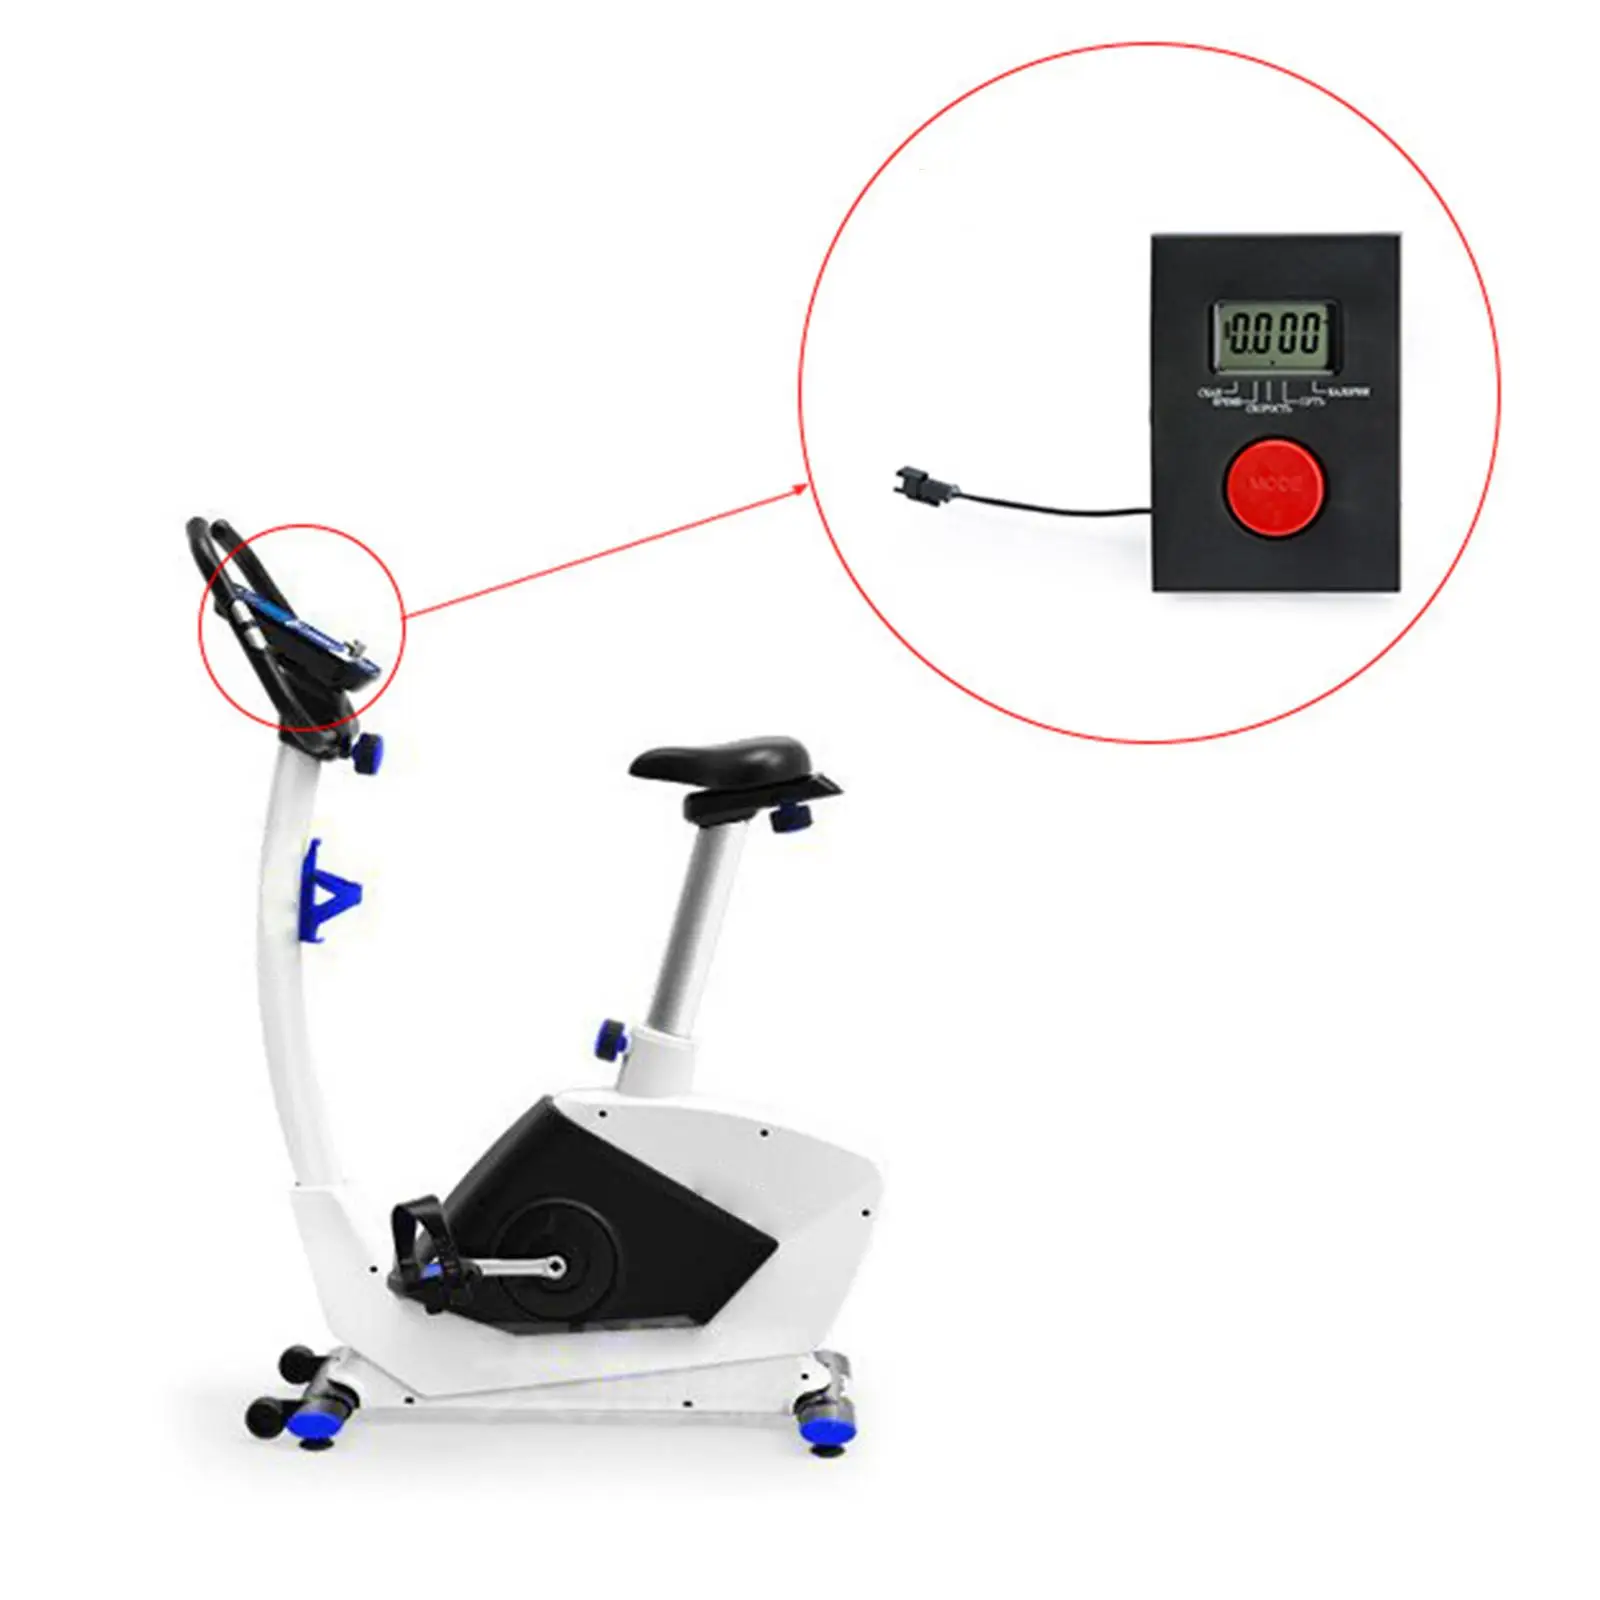 Monitor speedometers for Stationary Bikes Measurement for Cycling Counter